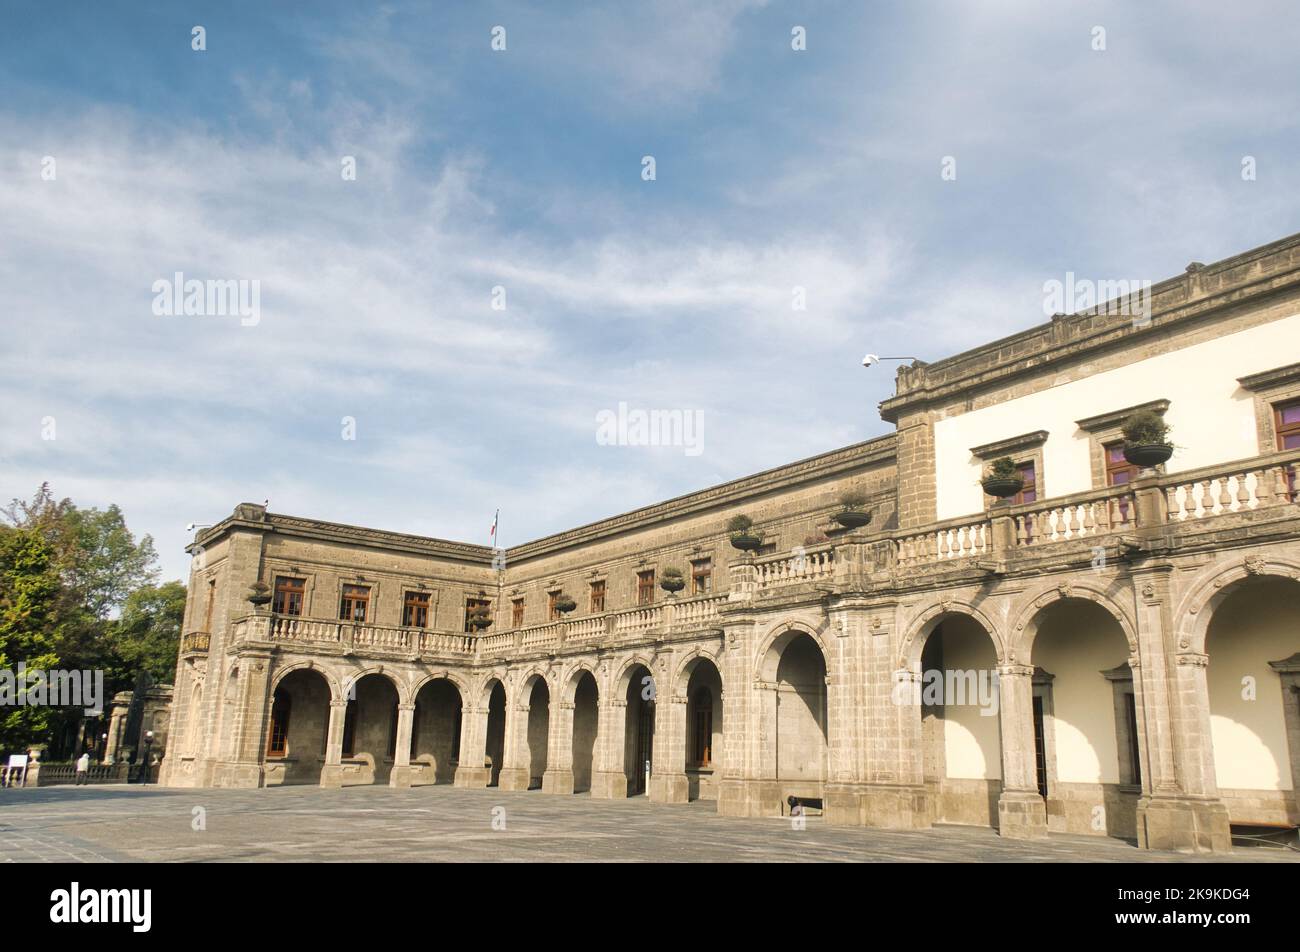 A Historical Chapultepec Castle in mexico city Stock Photo